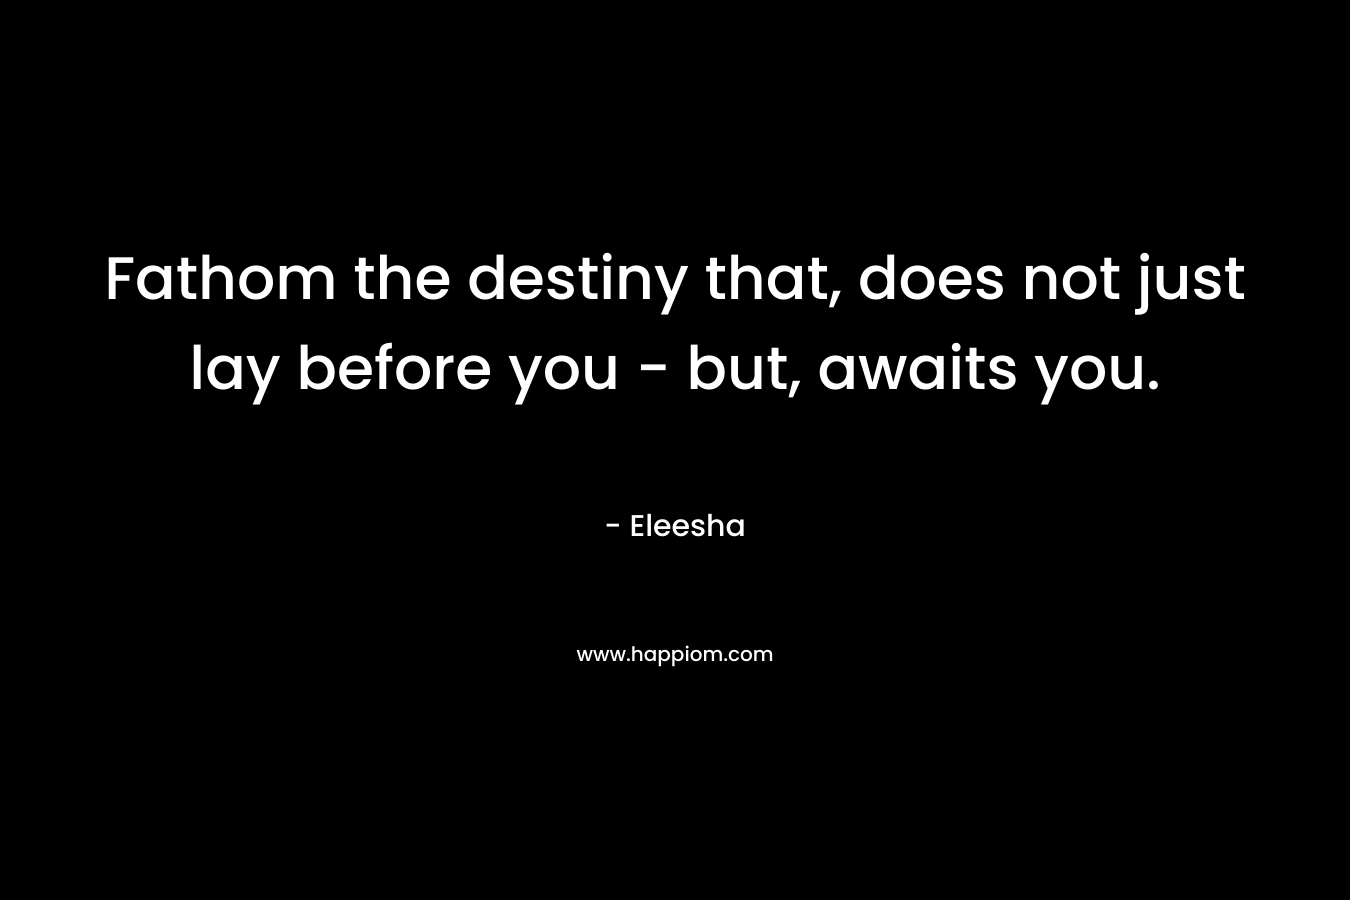 Fathom the destiny that, does not just lay before you - but, awaits you.